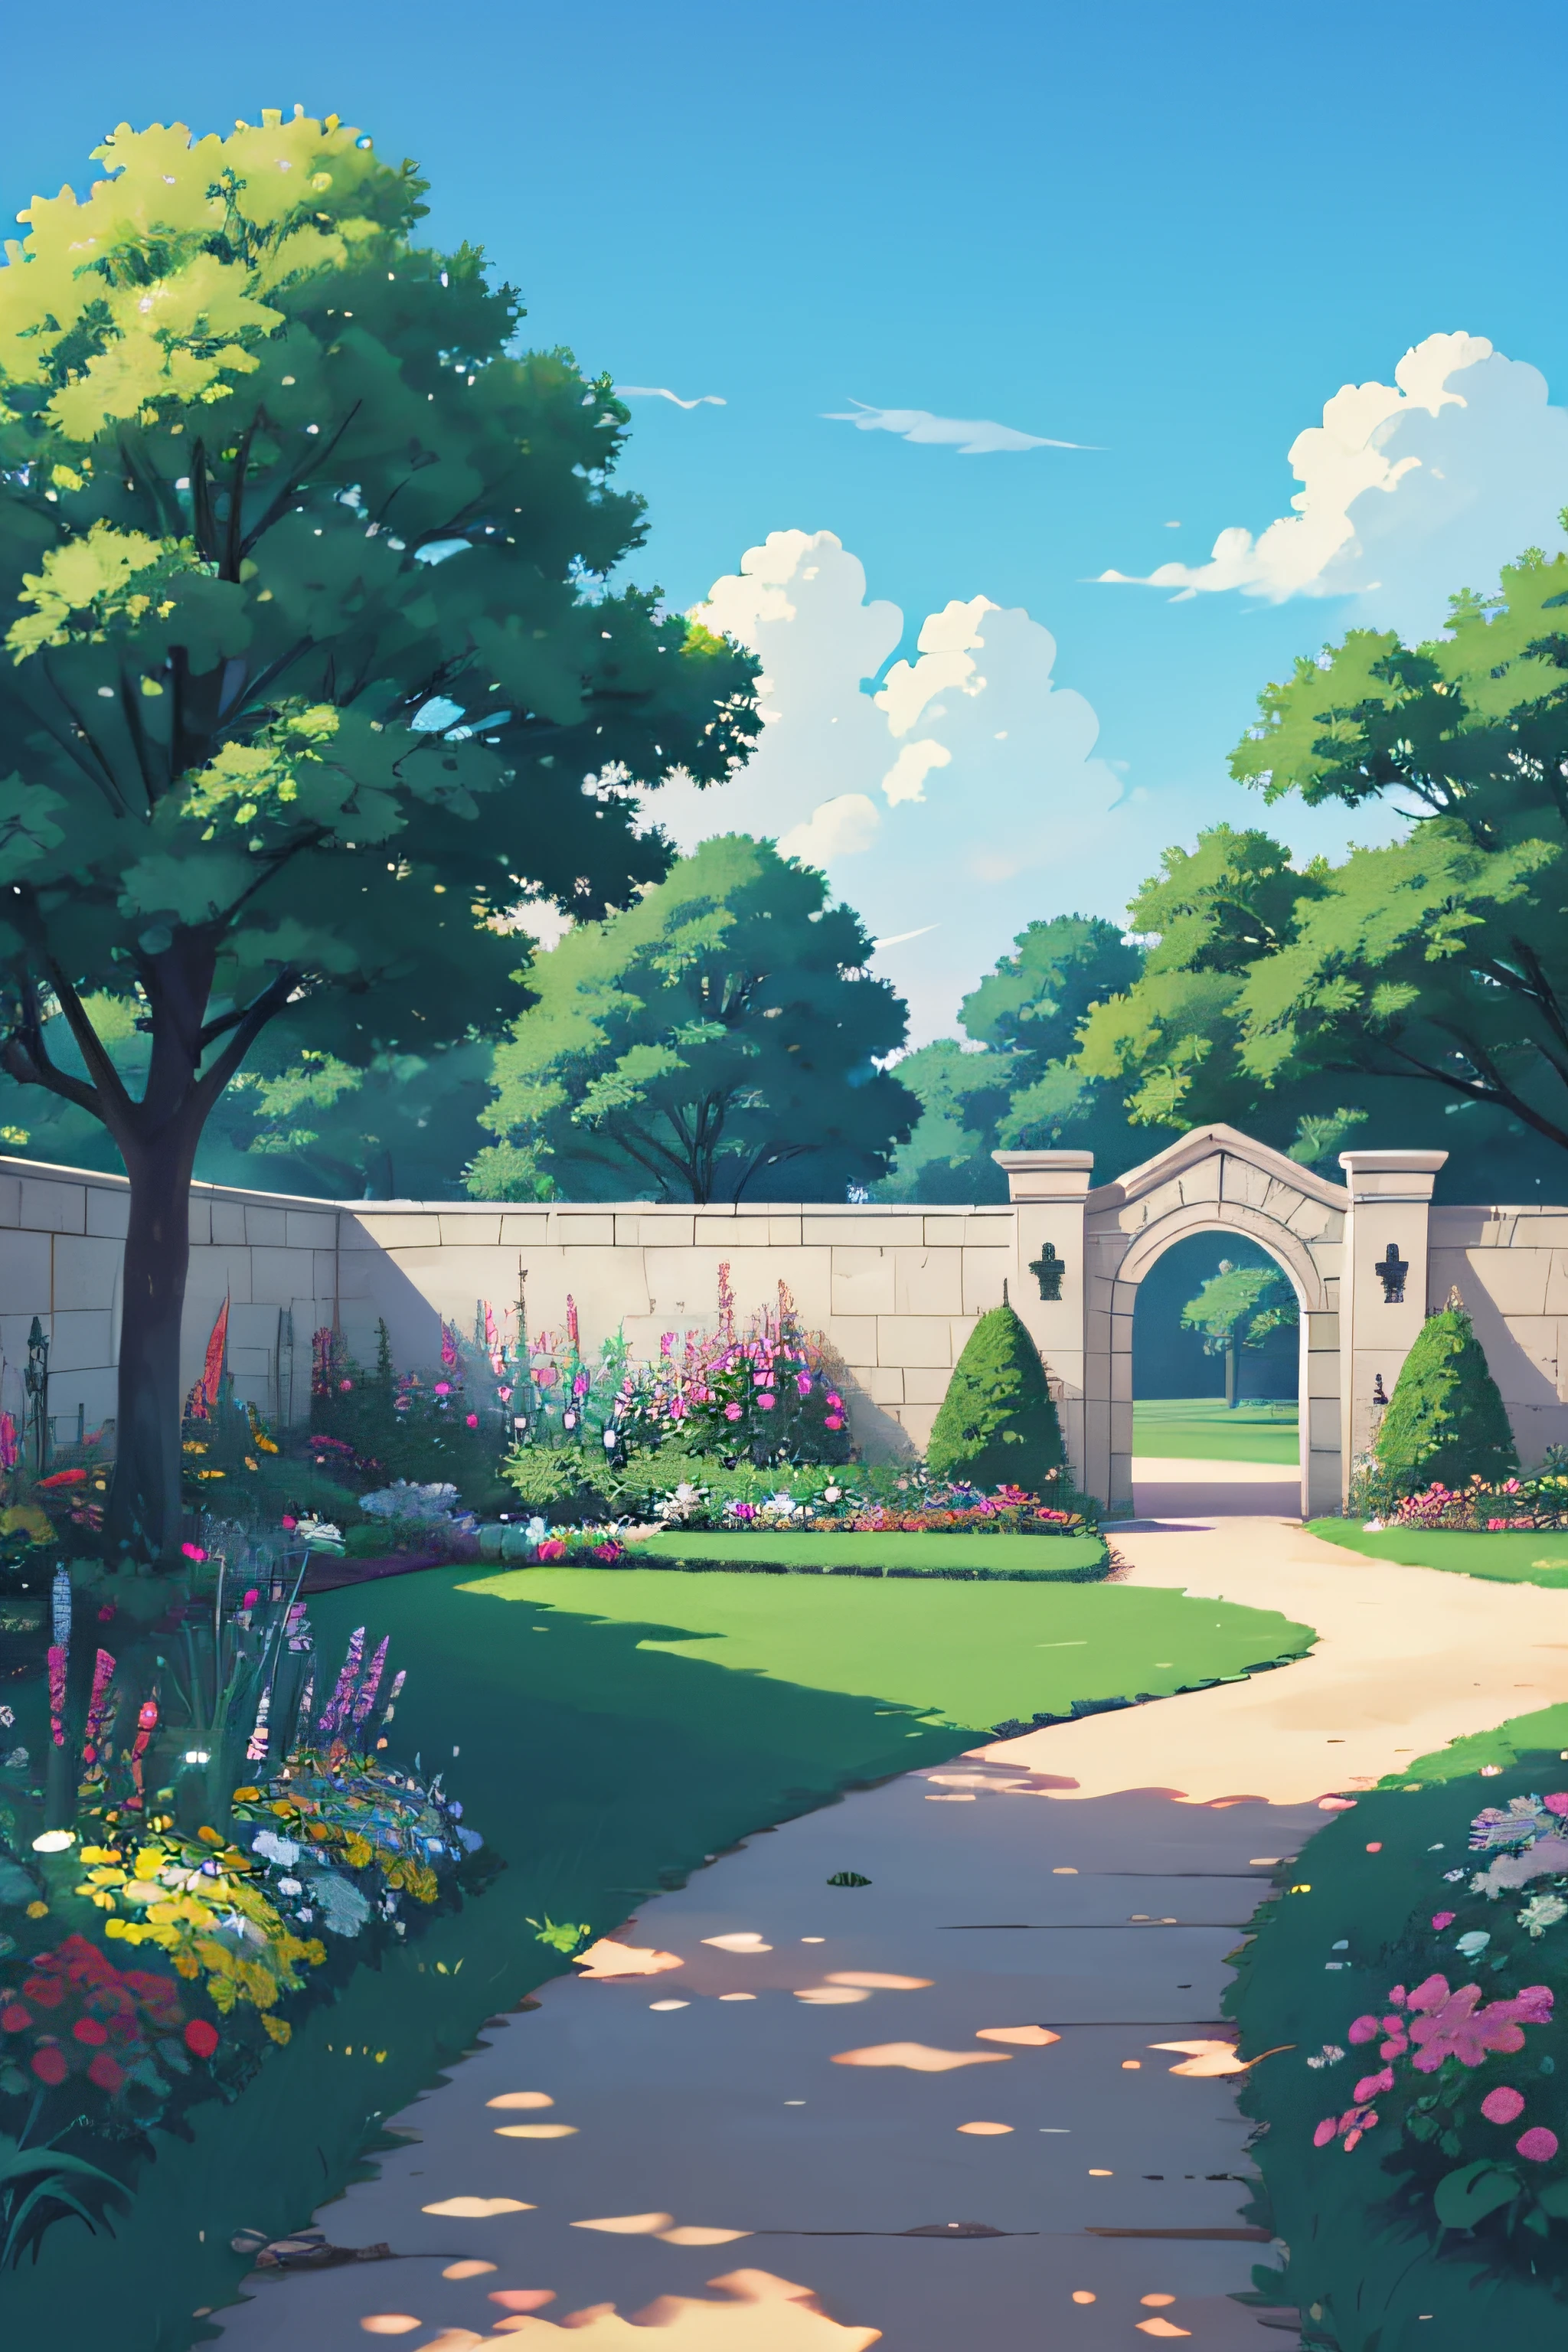 simple garden scenery digital painting. anime style art. behind clear sky. for portrait purposes